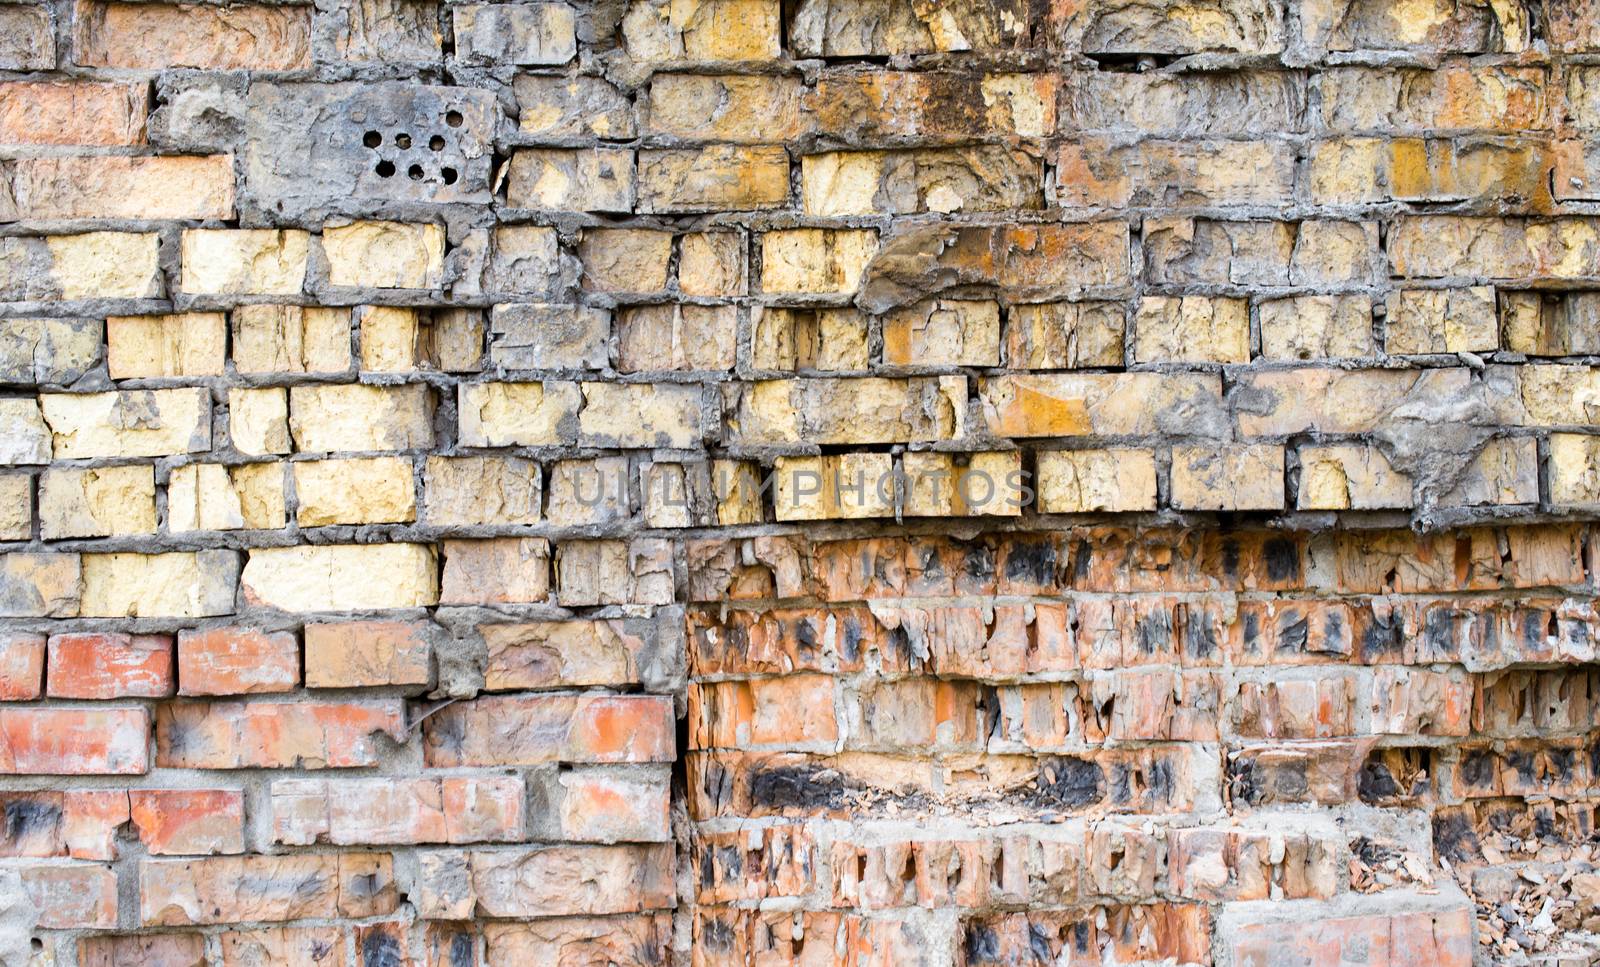 The old brick wall with rich texture.